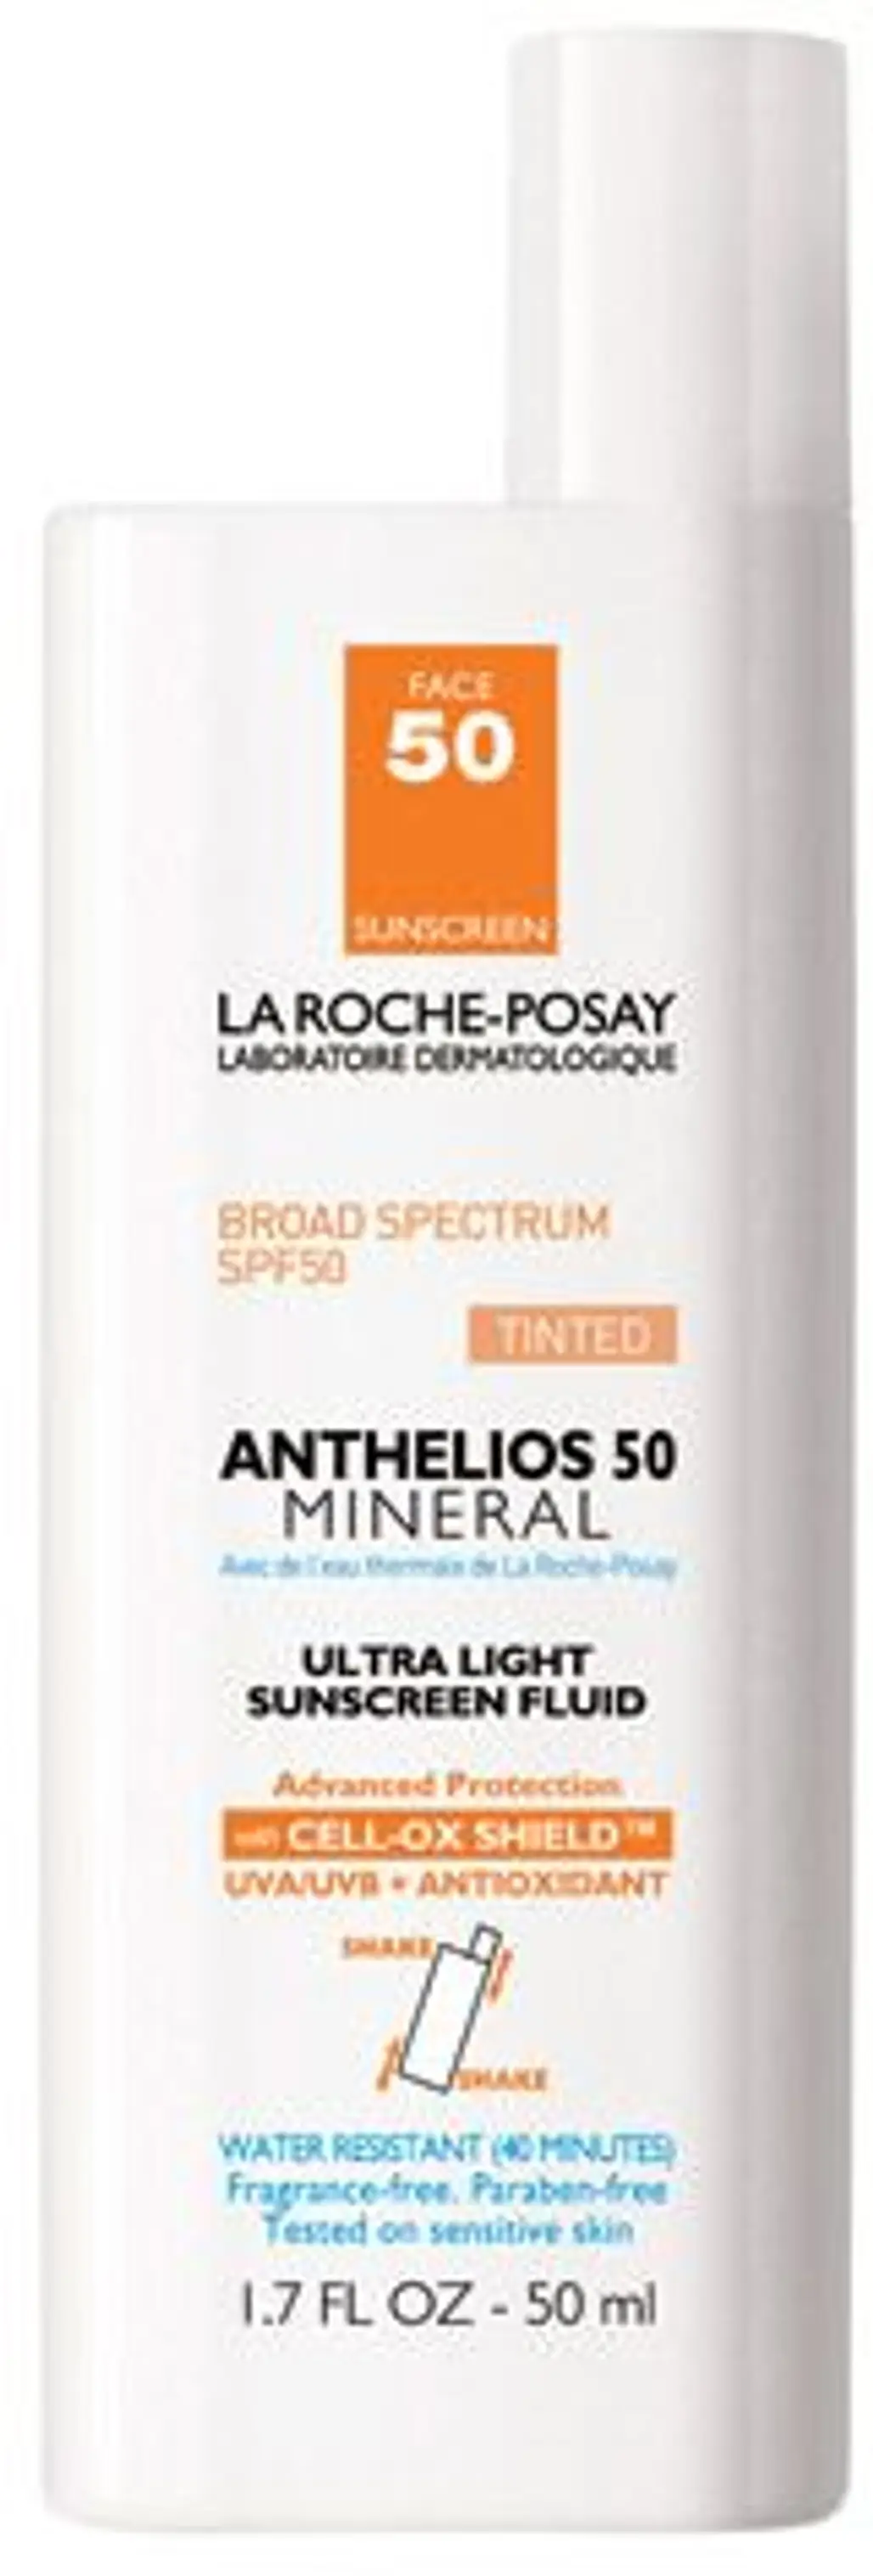 LA ROCHE-POSAY Anthelios Mineral Tinted Ultra-Light Sunscreen Fluid SPF 50